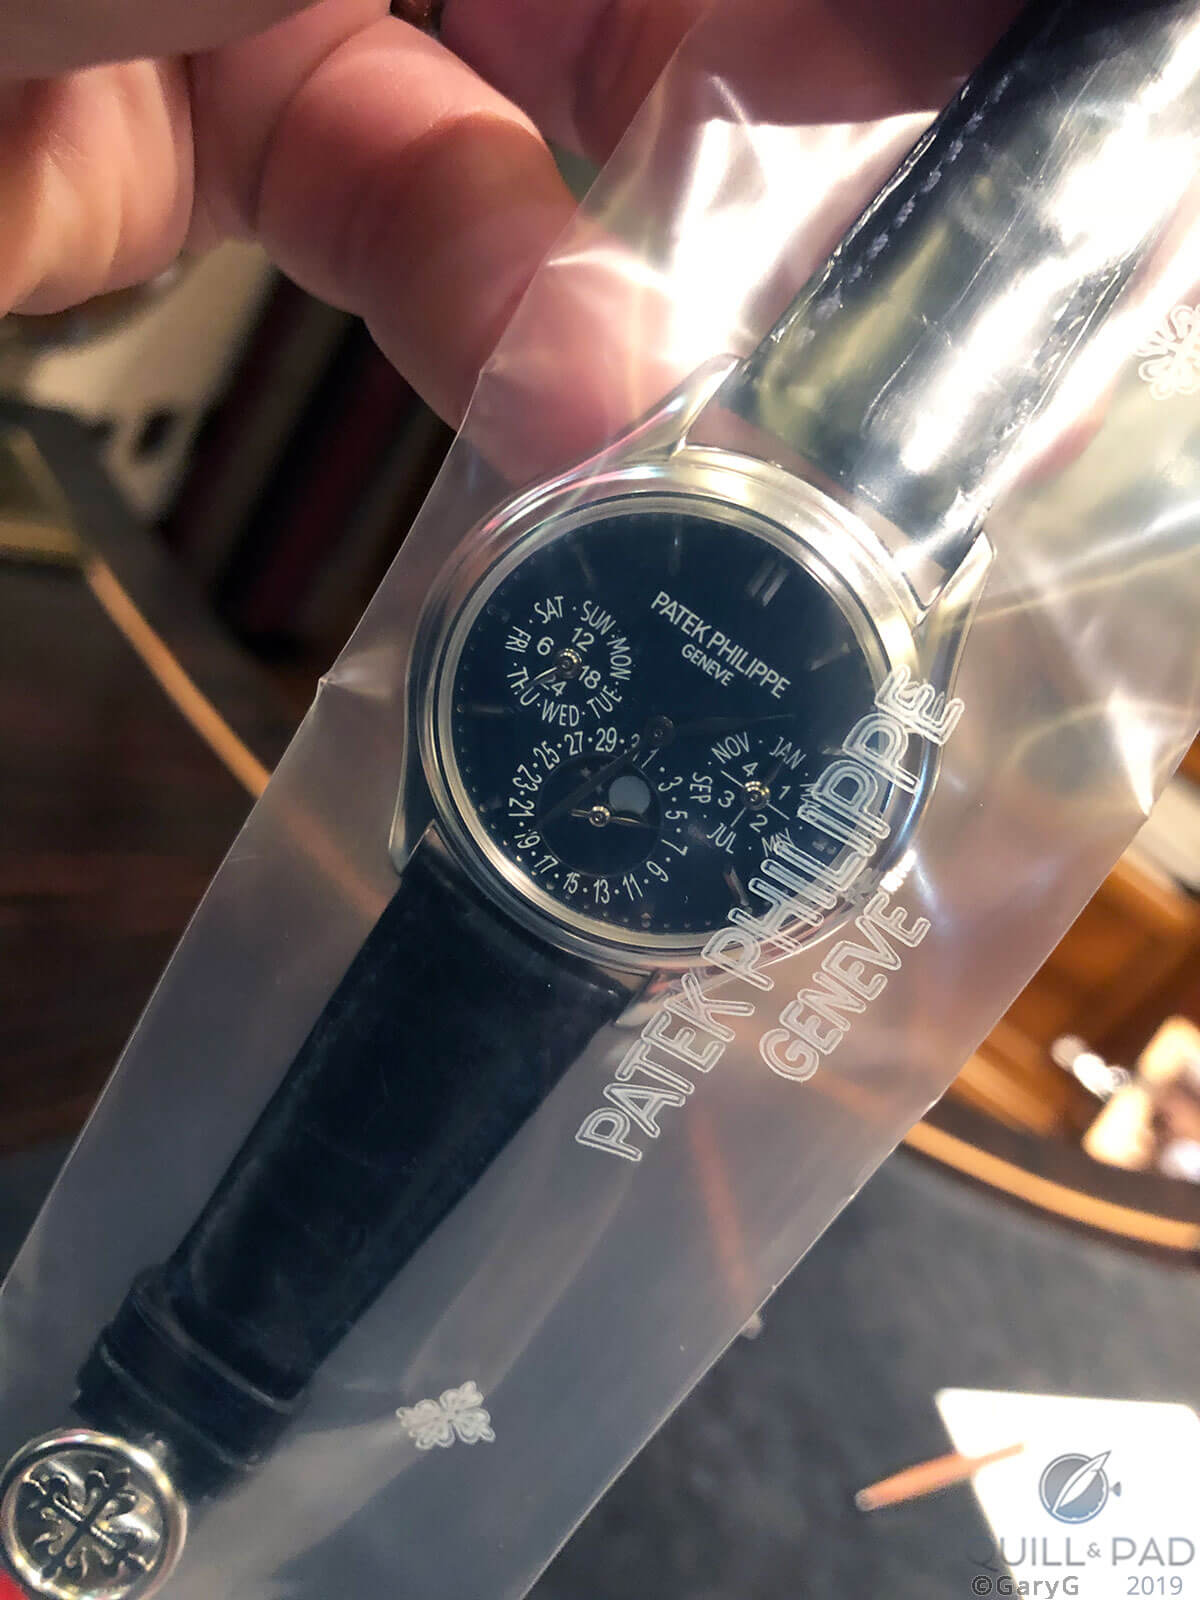 Geneva sealed: Patek Philippe Reference 3940P in its thick plastic bag